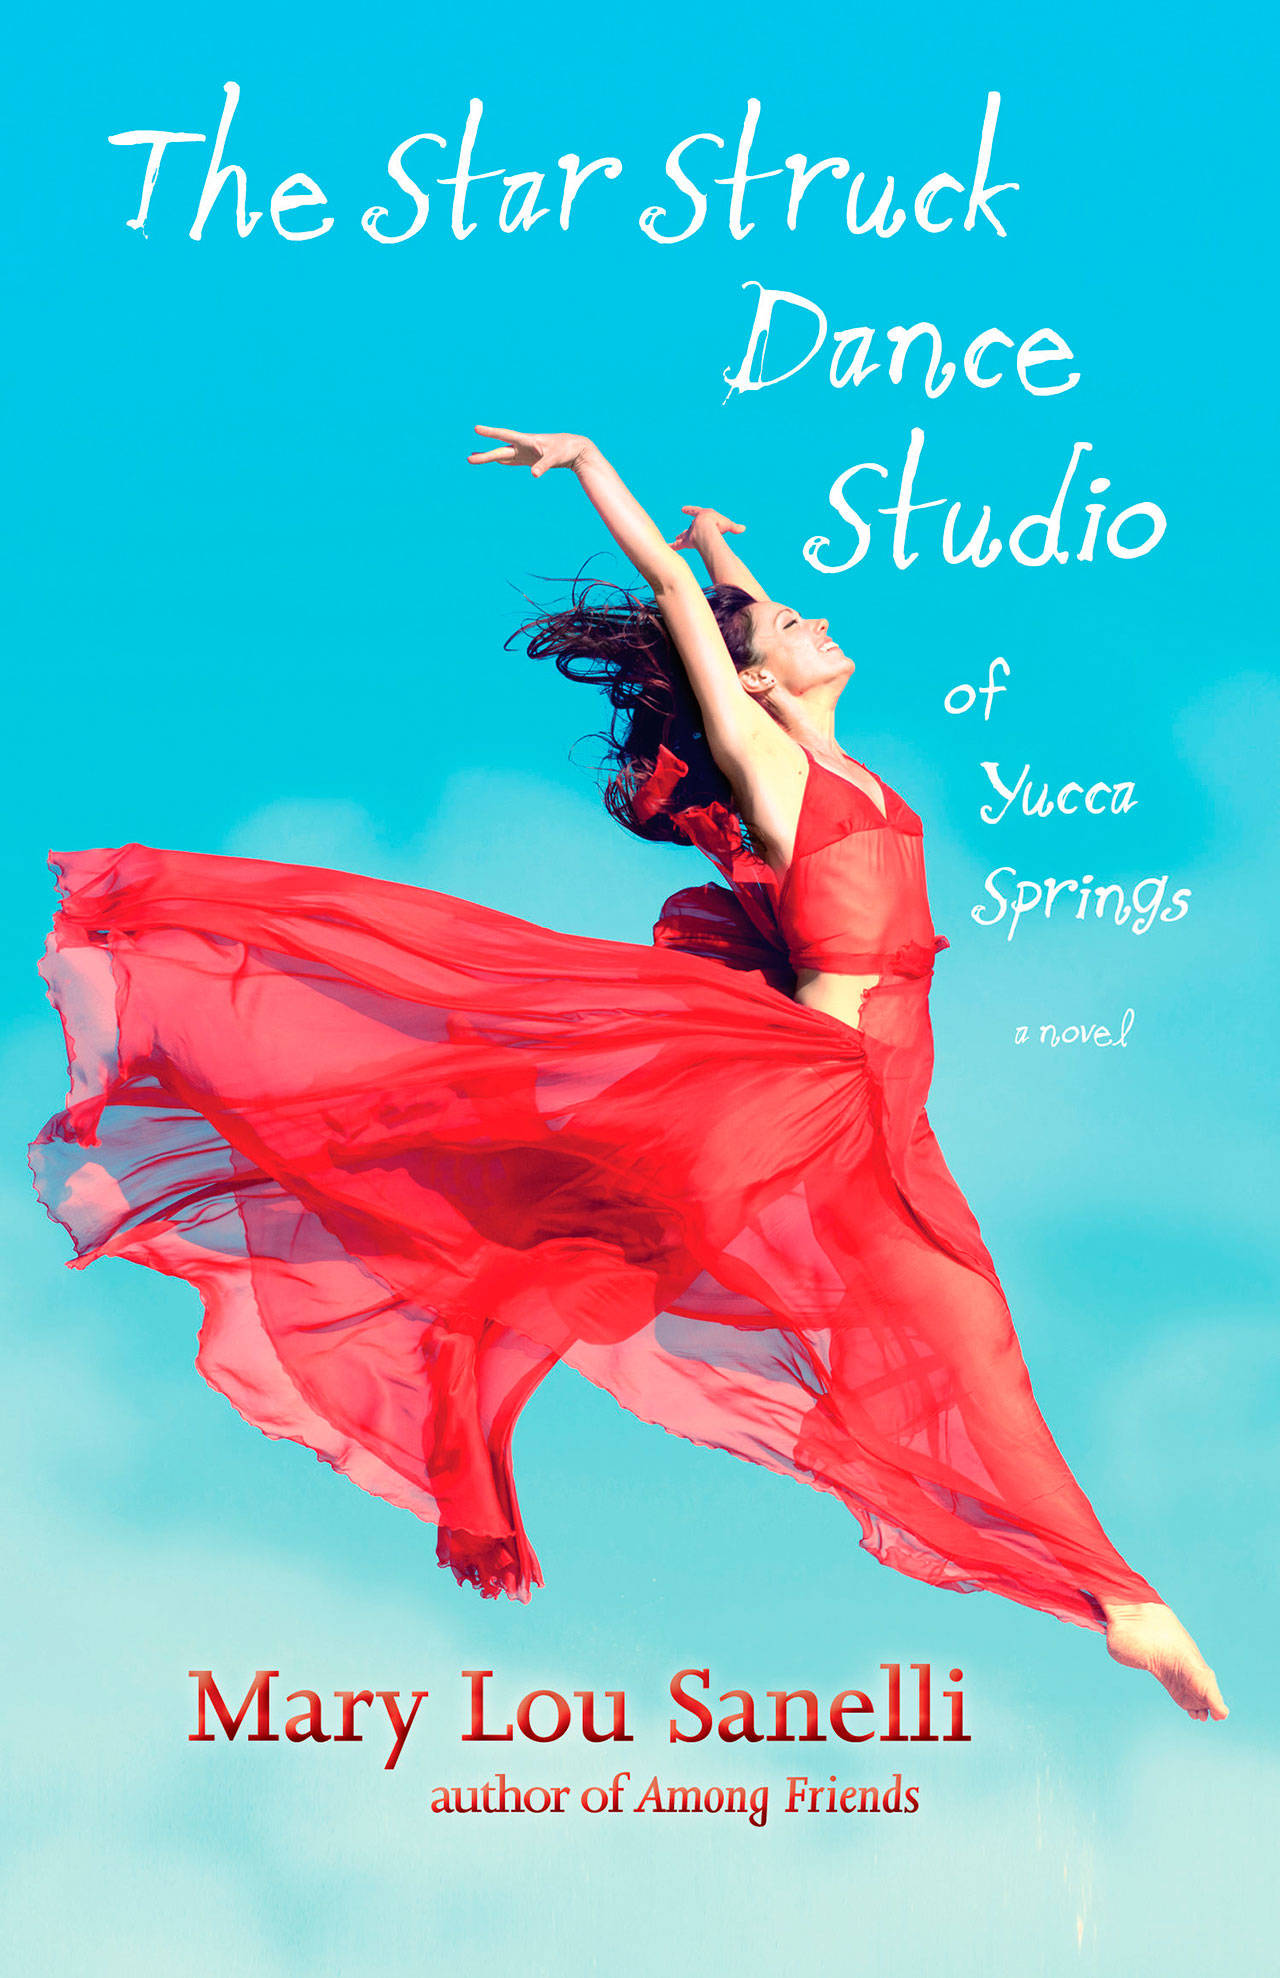 Image courtesy of Eagle Harbor Book Company | Mary Lou Sanelli will visit Eagle Harbor Book Company at 3 p.m. Sunday, Oct. 20 to discuss her new novel “The Star Struck Dance Studio of Yucca Springs,” accompanied by special guest dancers.